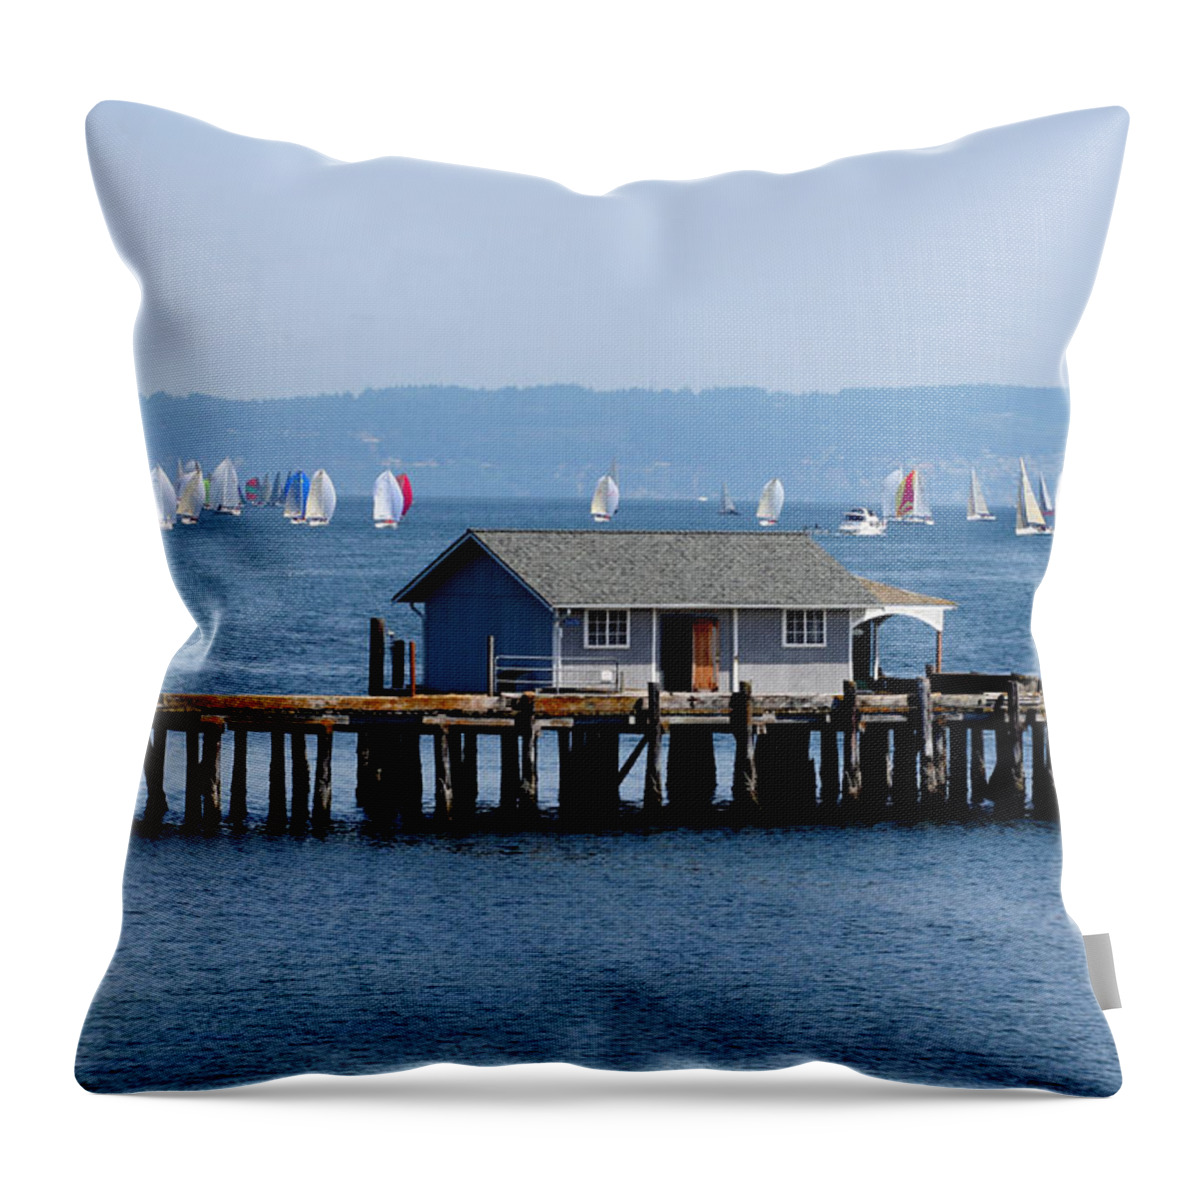 Penncove Throw Pillow featuring the photograph Sailing at Penn Cove by Mary Gaines